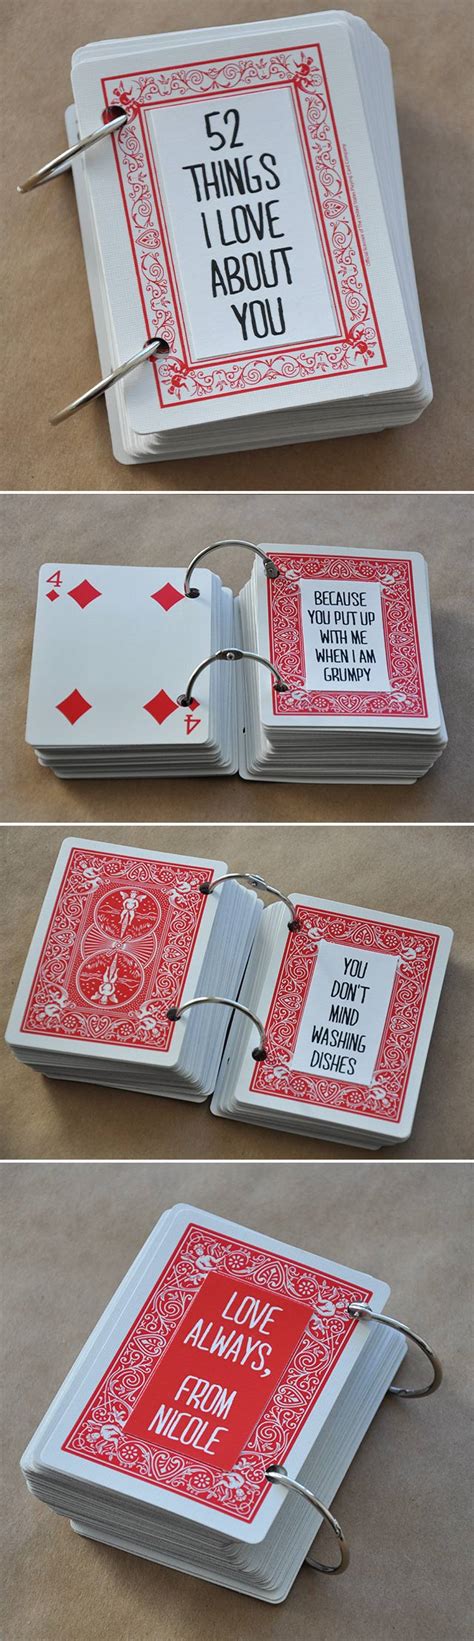 22 Reasons Why I Love You Cards Templates